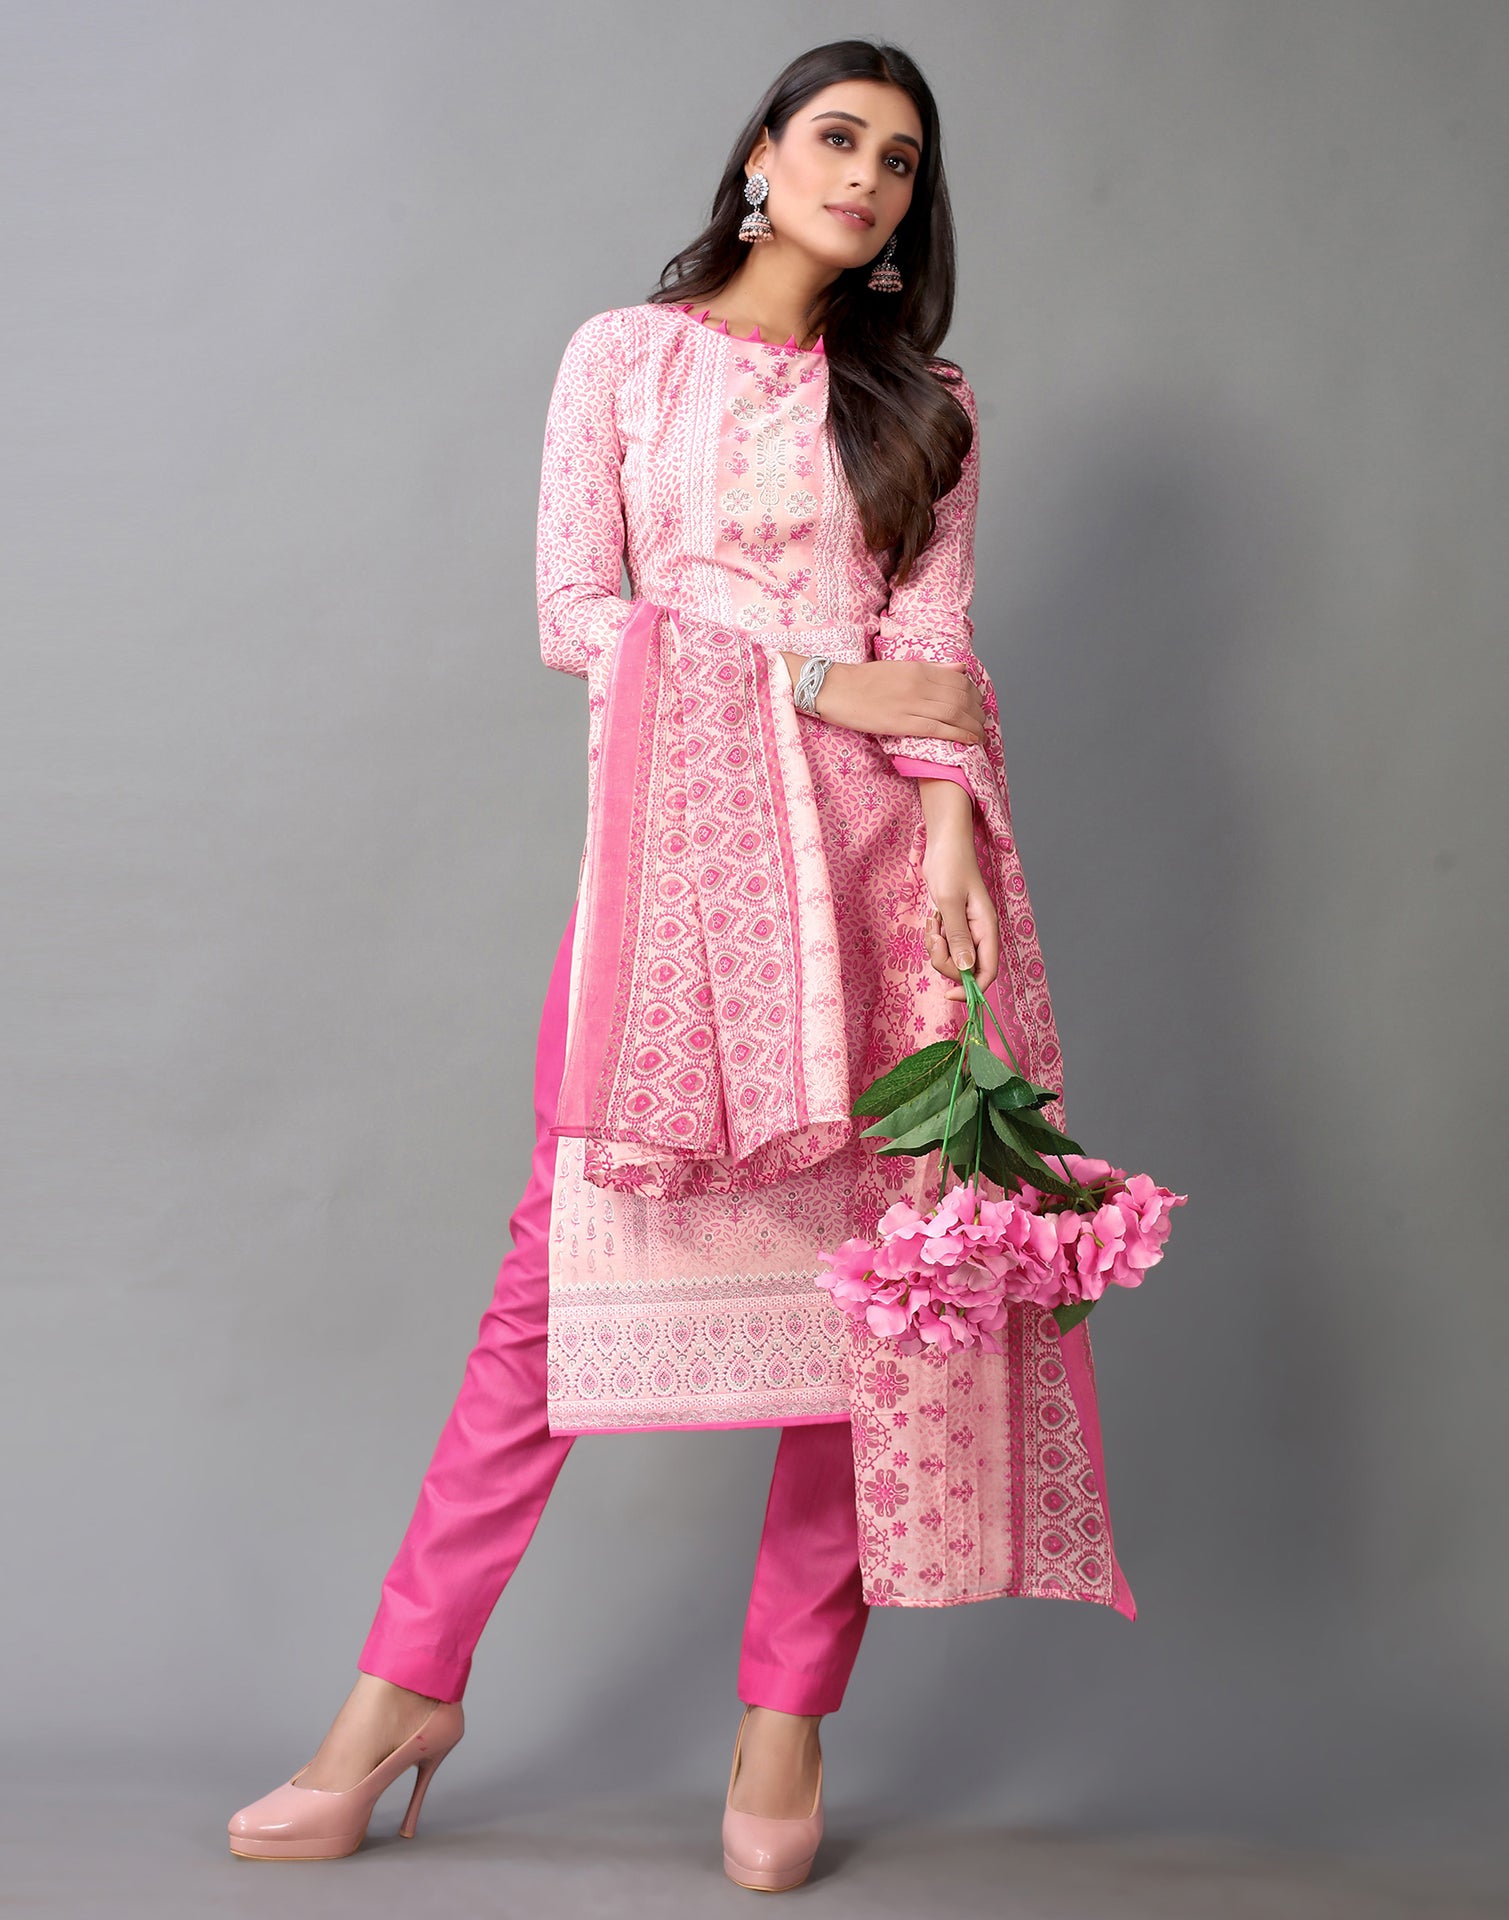 Buy PARADISE PRINTS Women's Cotton Foil Printed Unstitched Salwar Suit  Dress Material(Light Pink) at Amazon.in